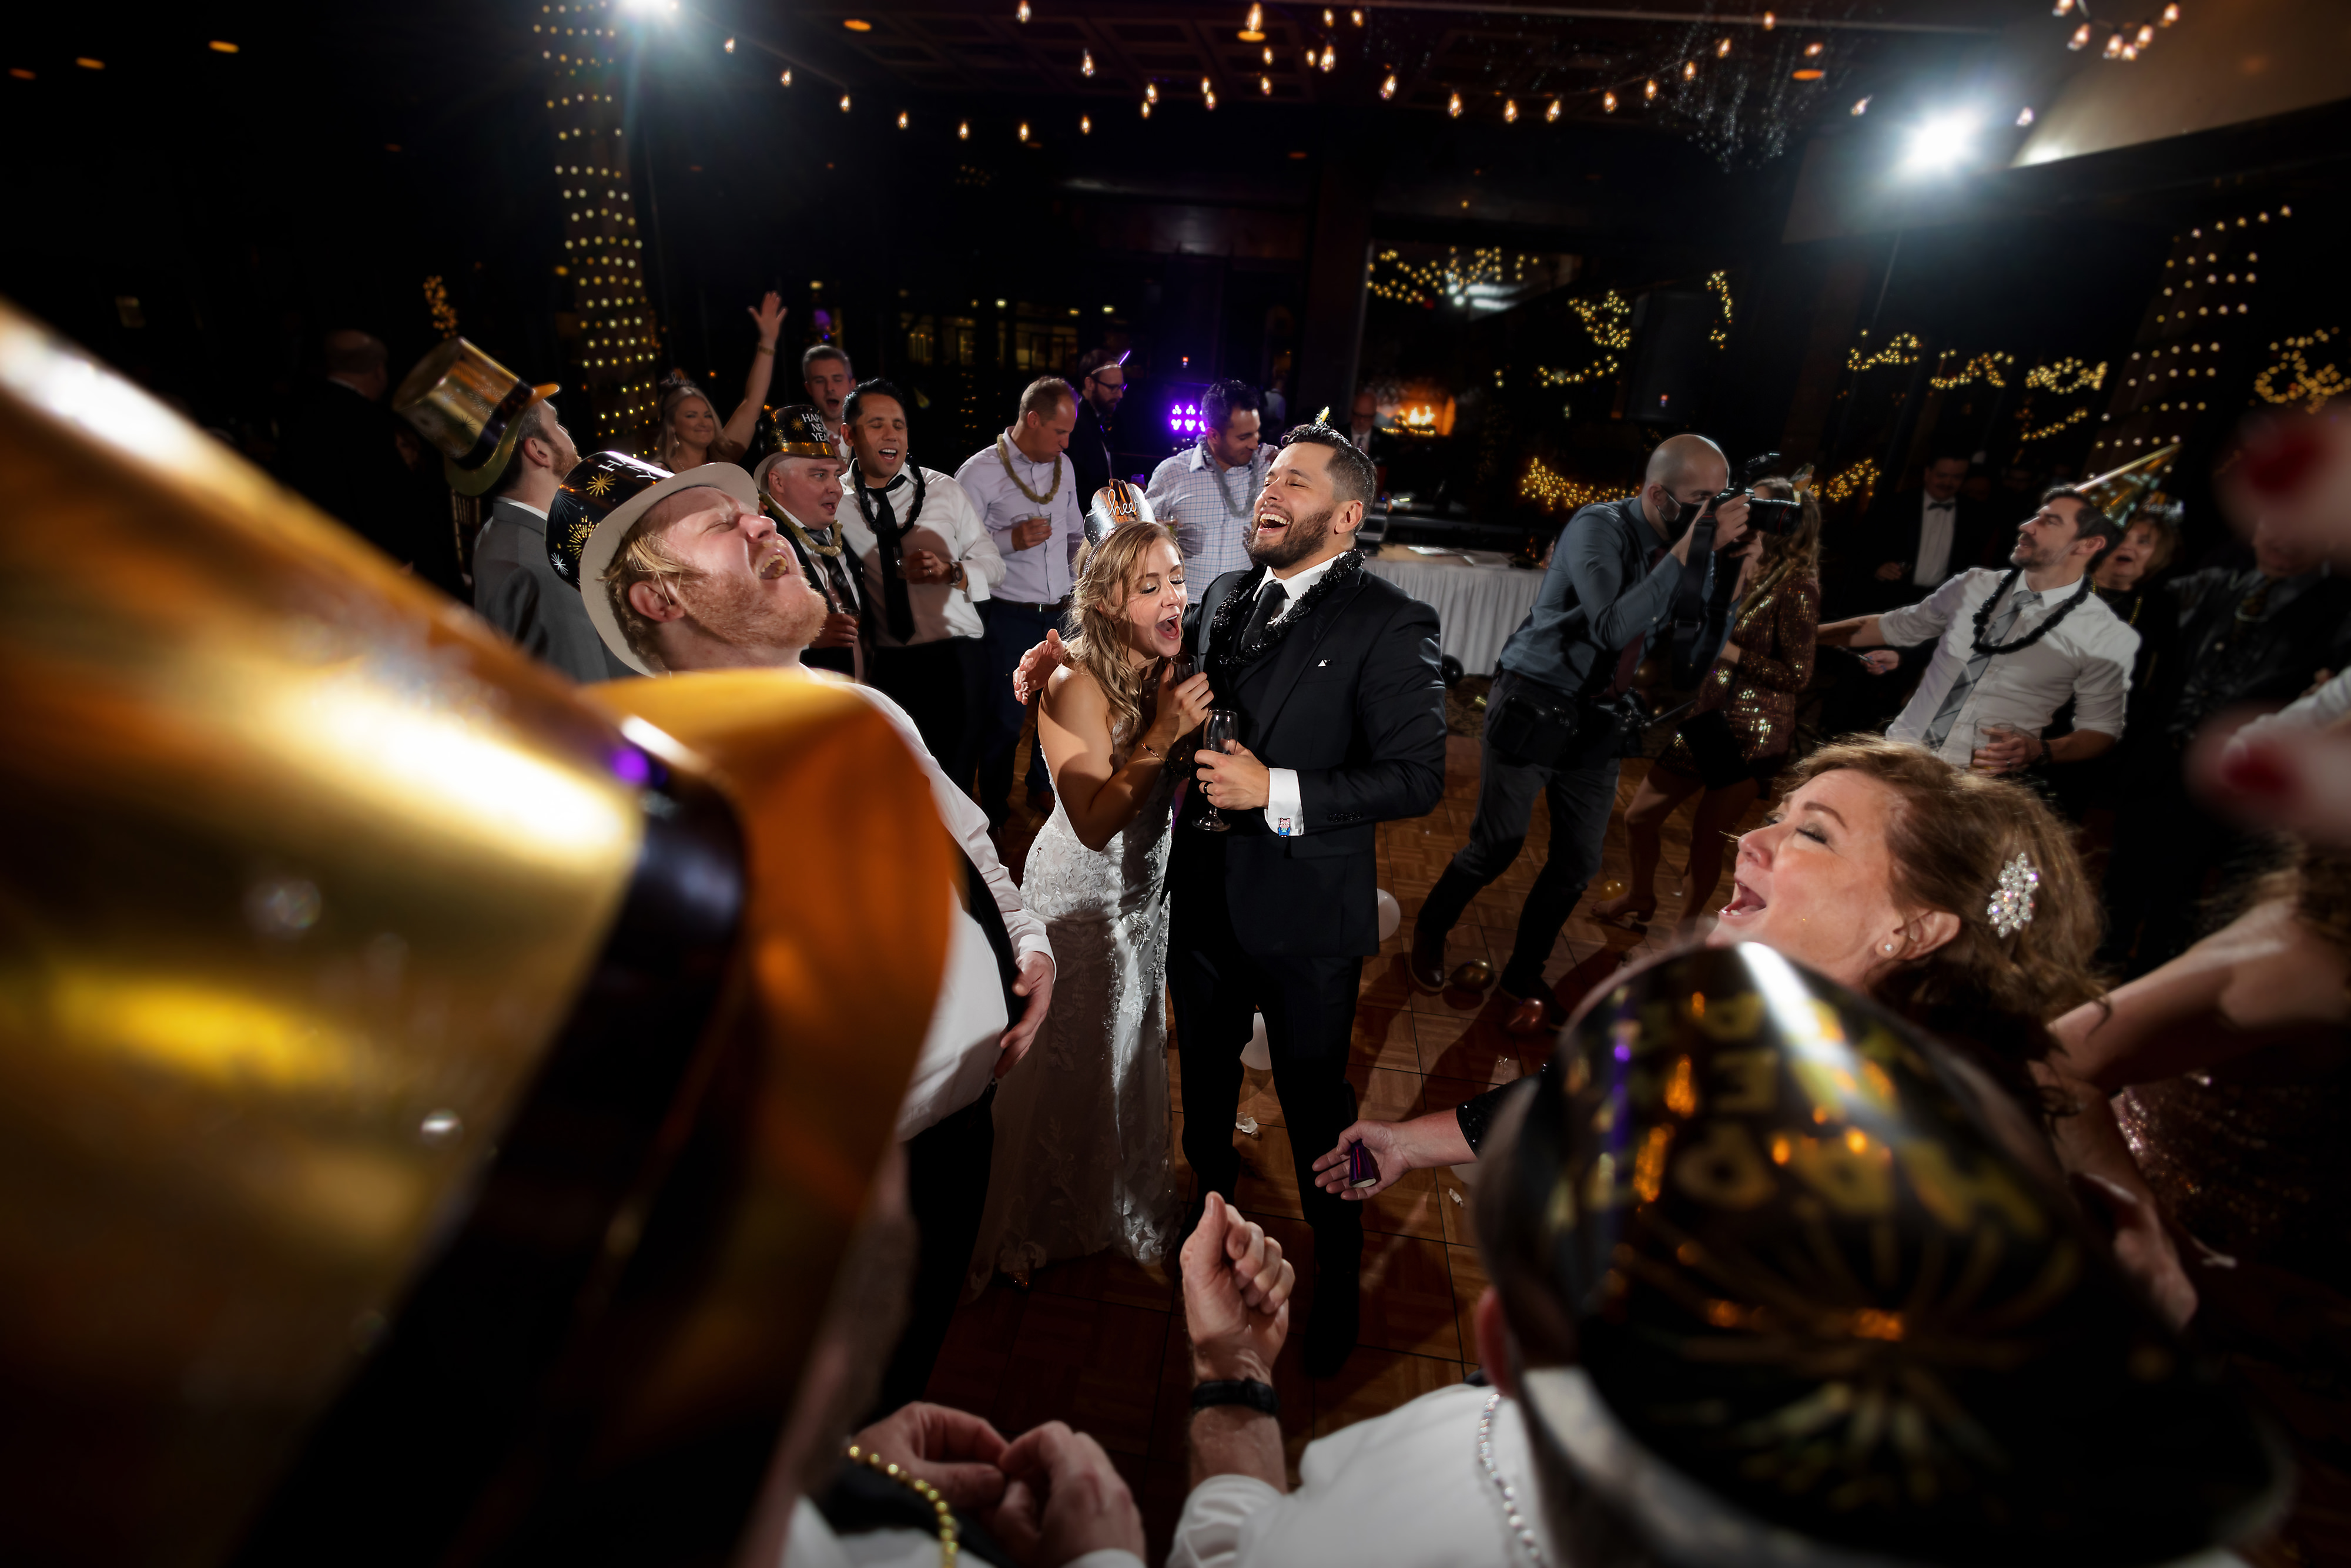 Wedding guests dance during winter wedding at Two Brothers Roundhouse Brewery in Aurora, Illinois